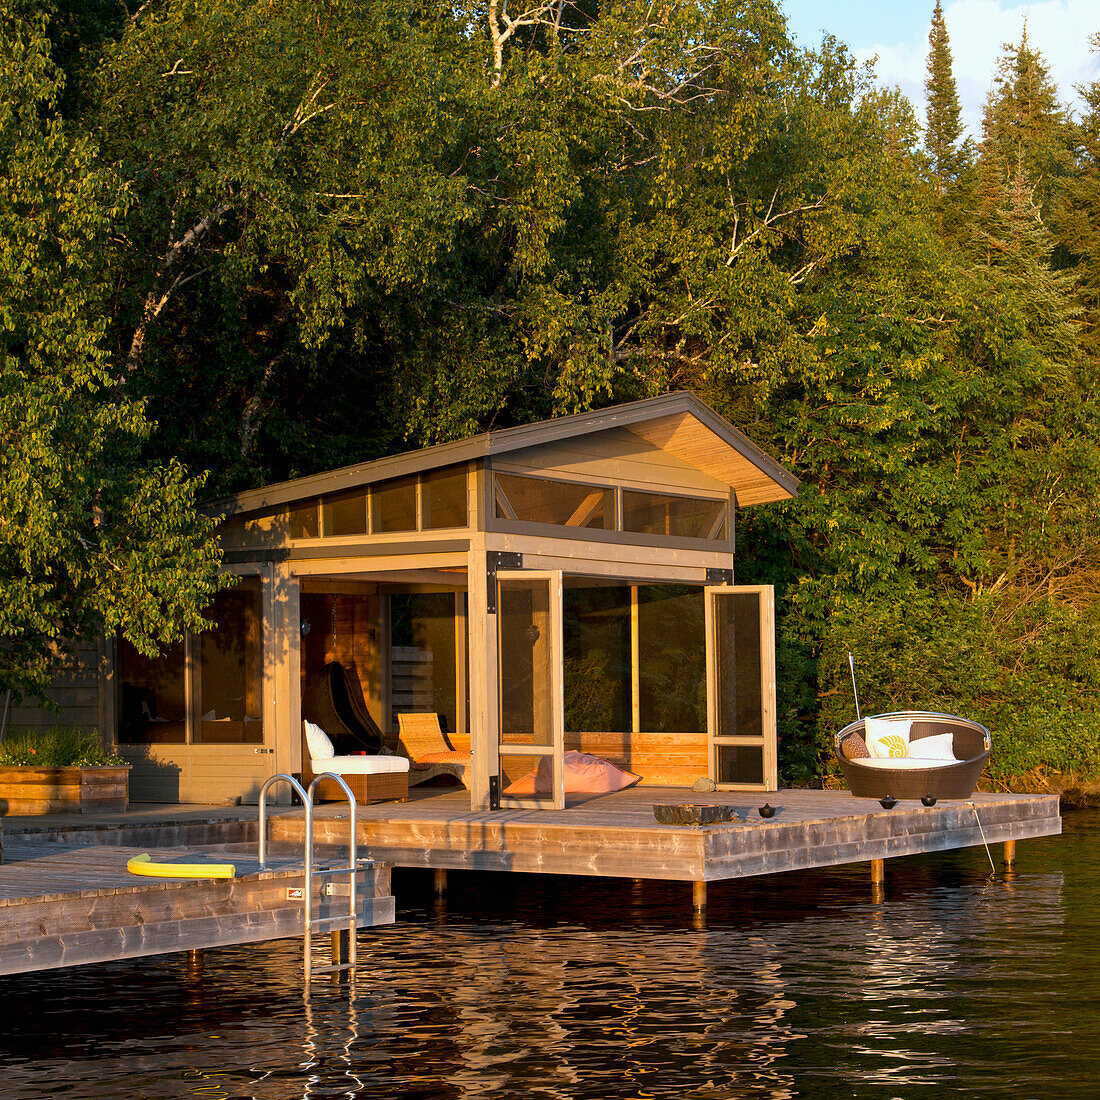 A Cottage With Wooden Dock On The Water's Edge; Lake Of The Woods Ontario Canada